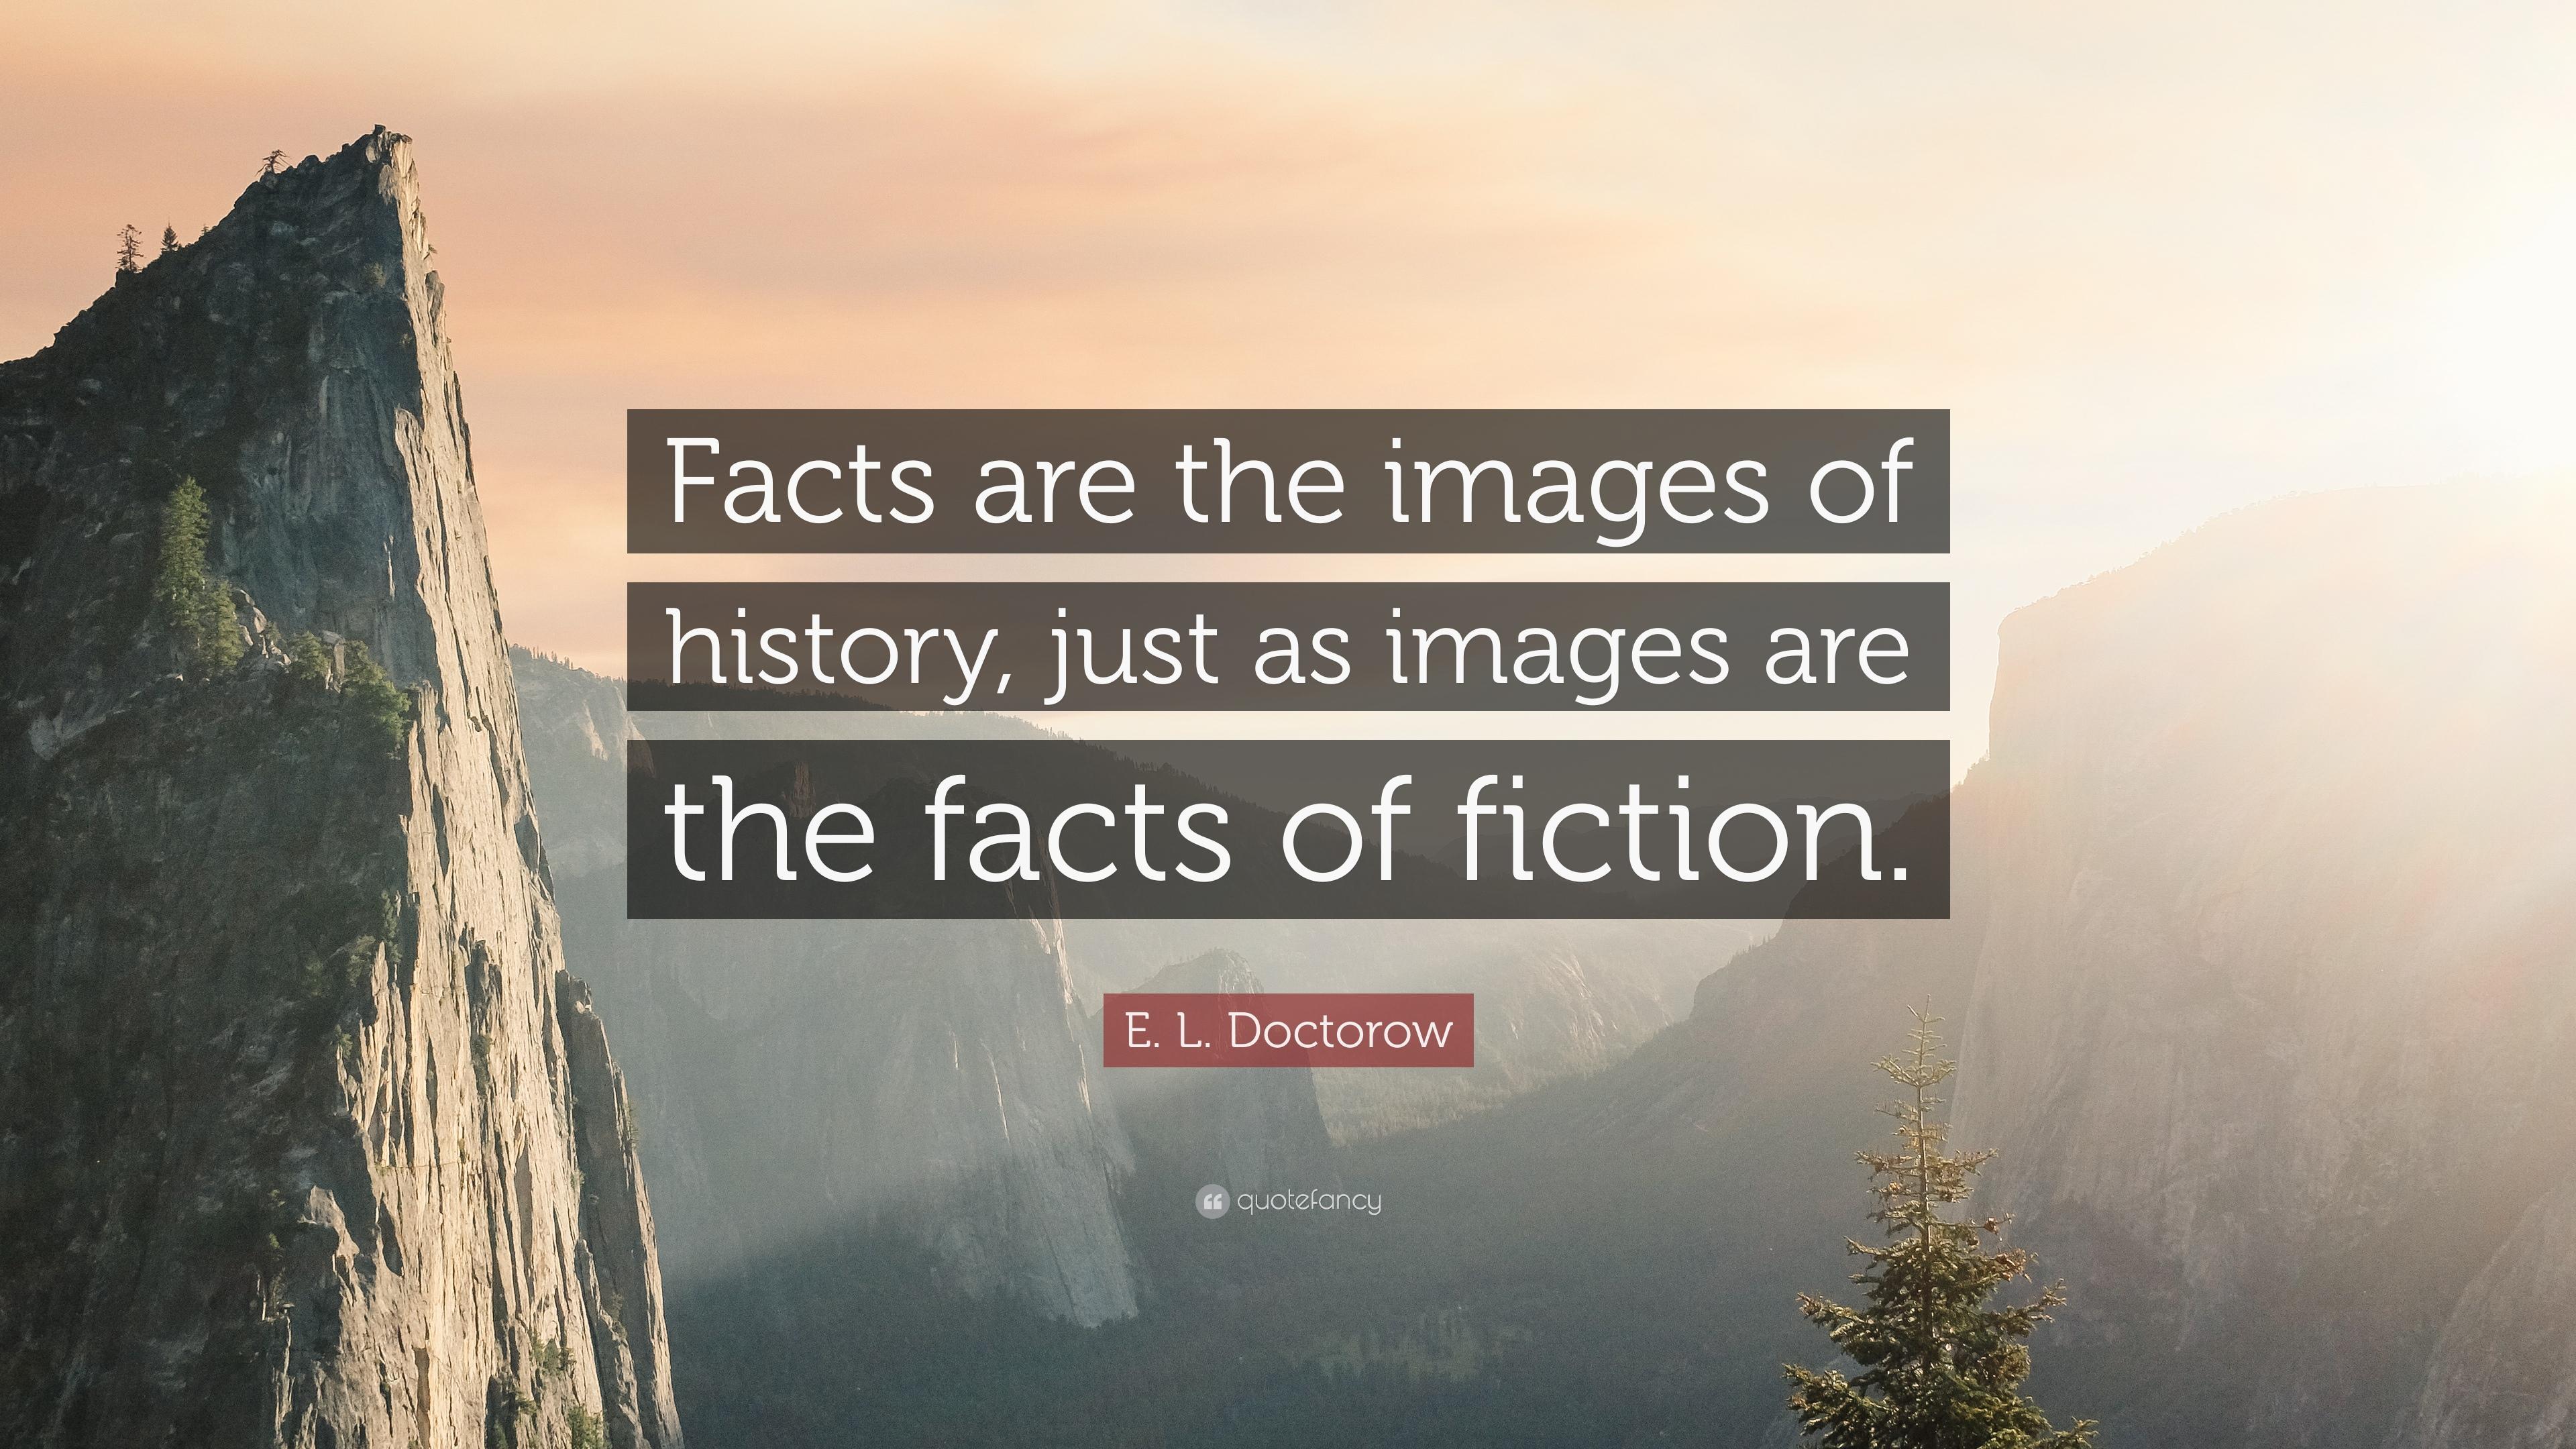 E. L. Doctorow Quote: “Facts are the image of history, just